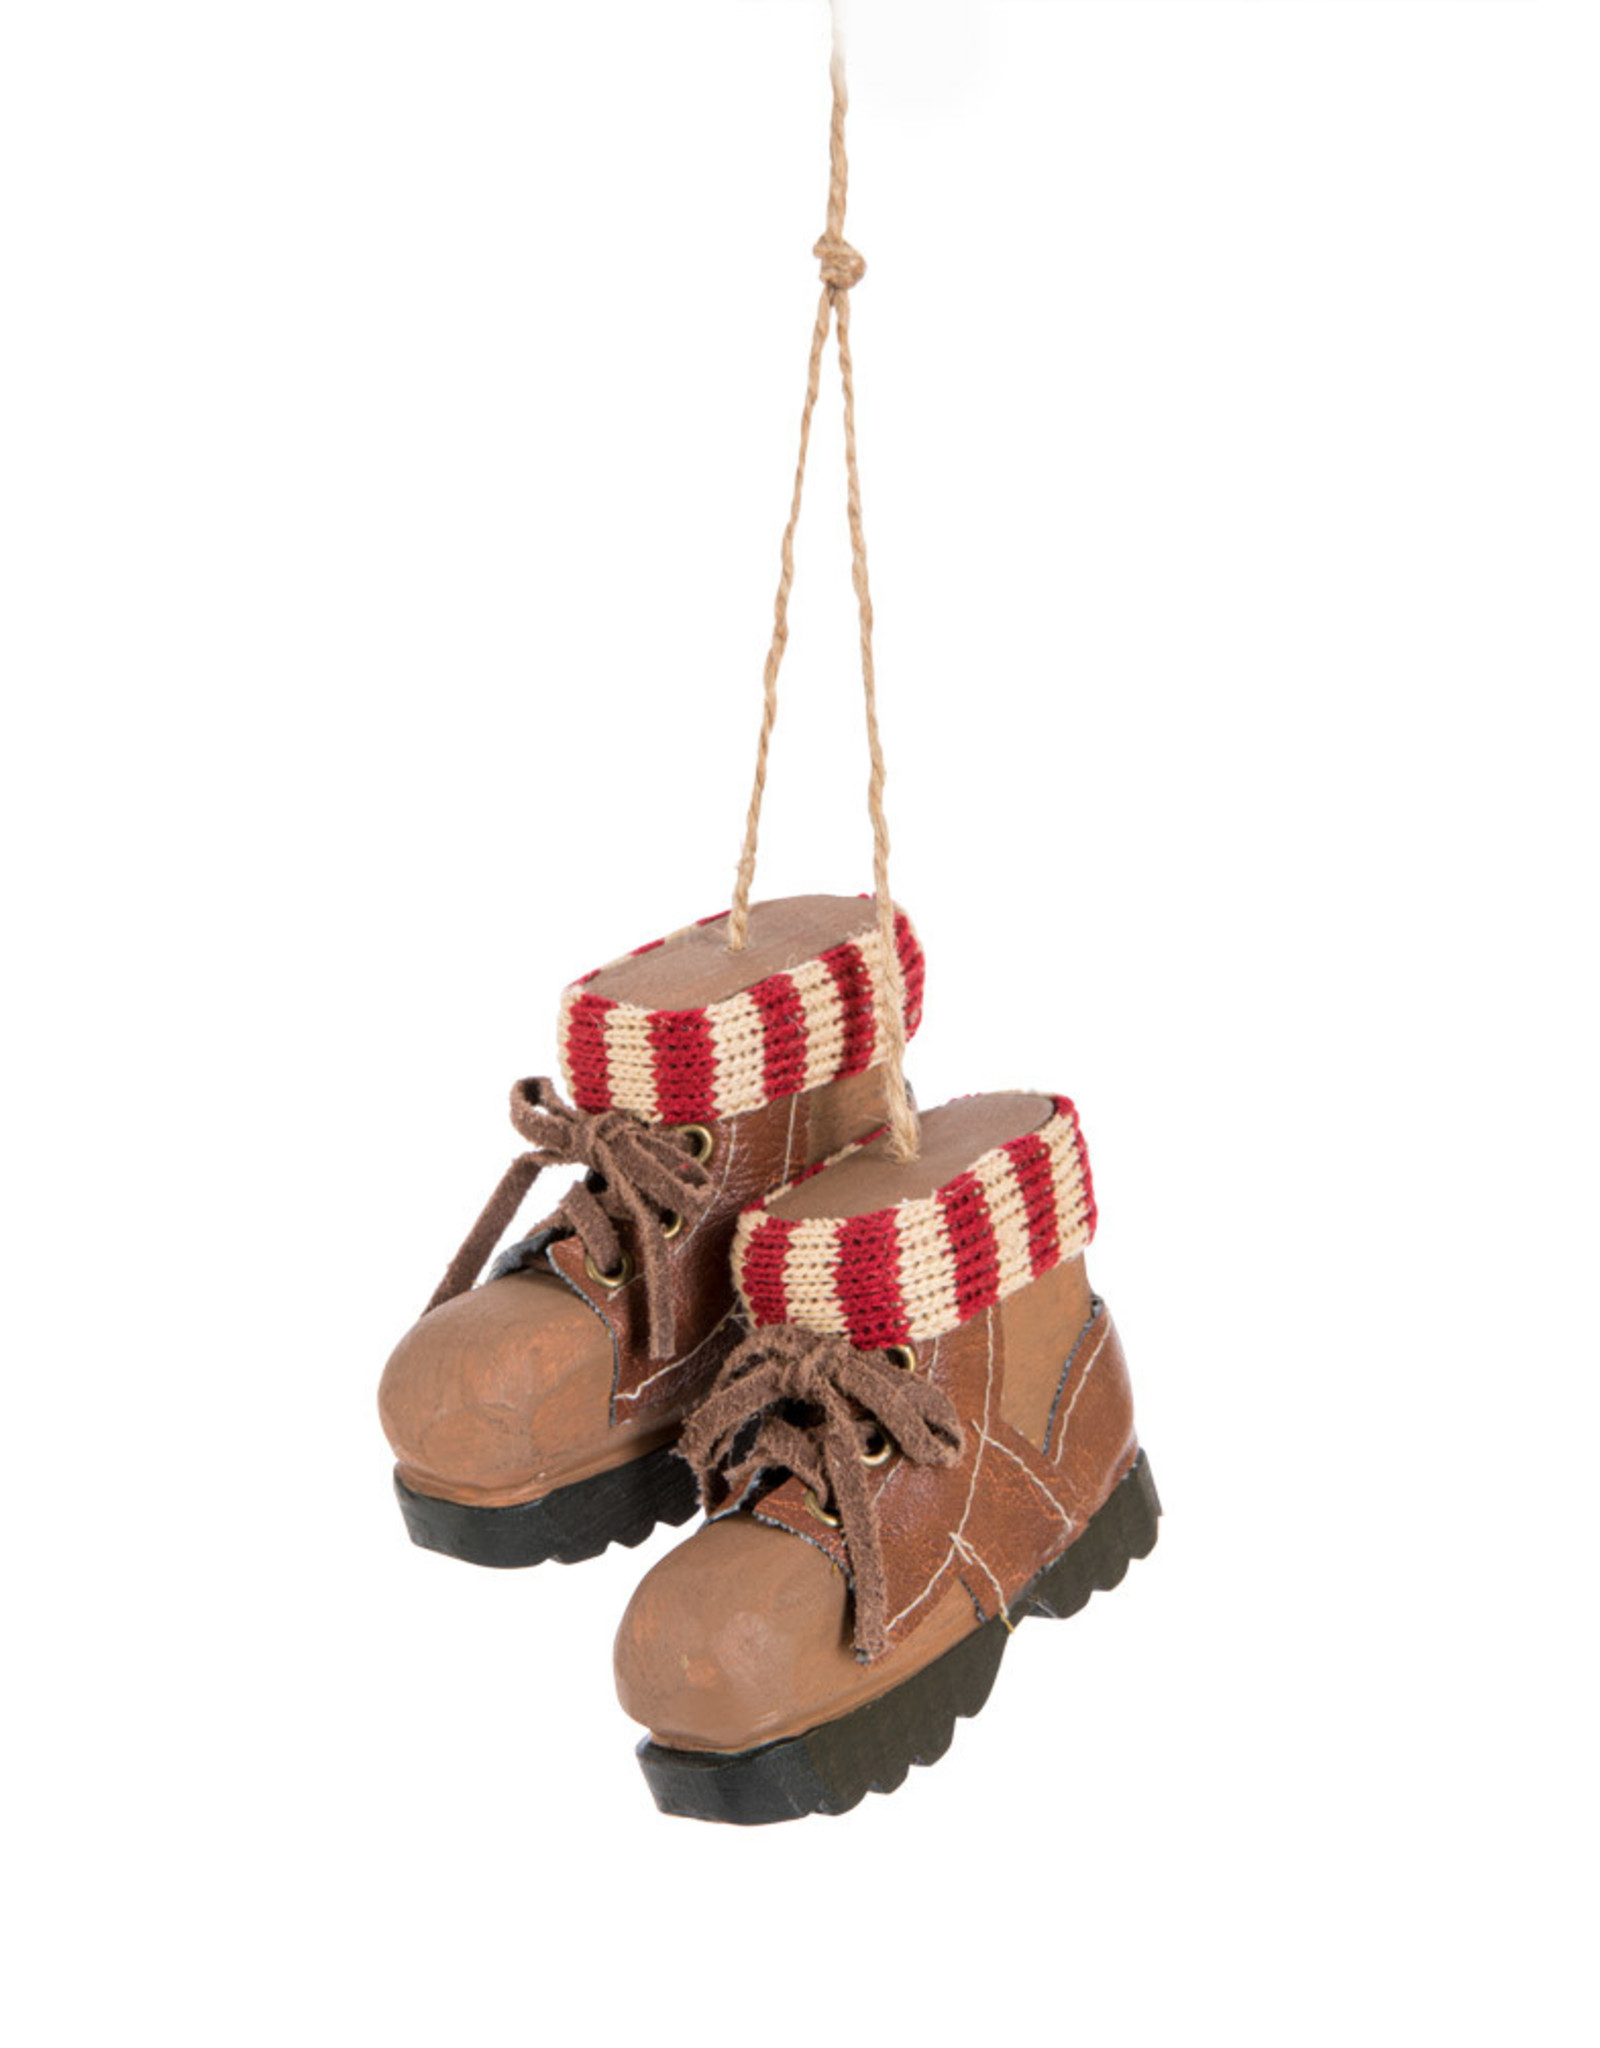 Pair of Hiking Boots Ornament